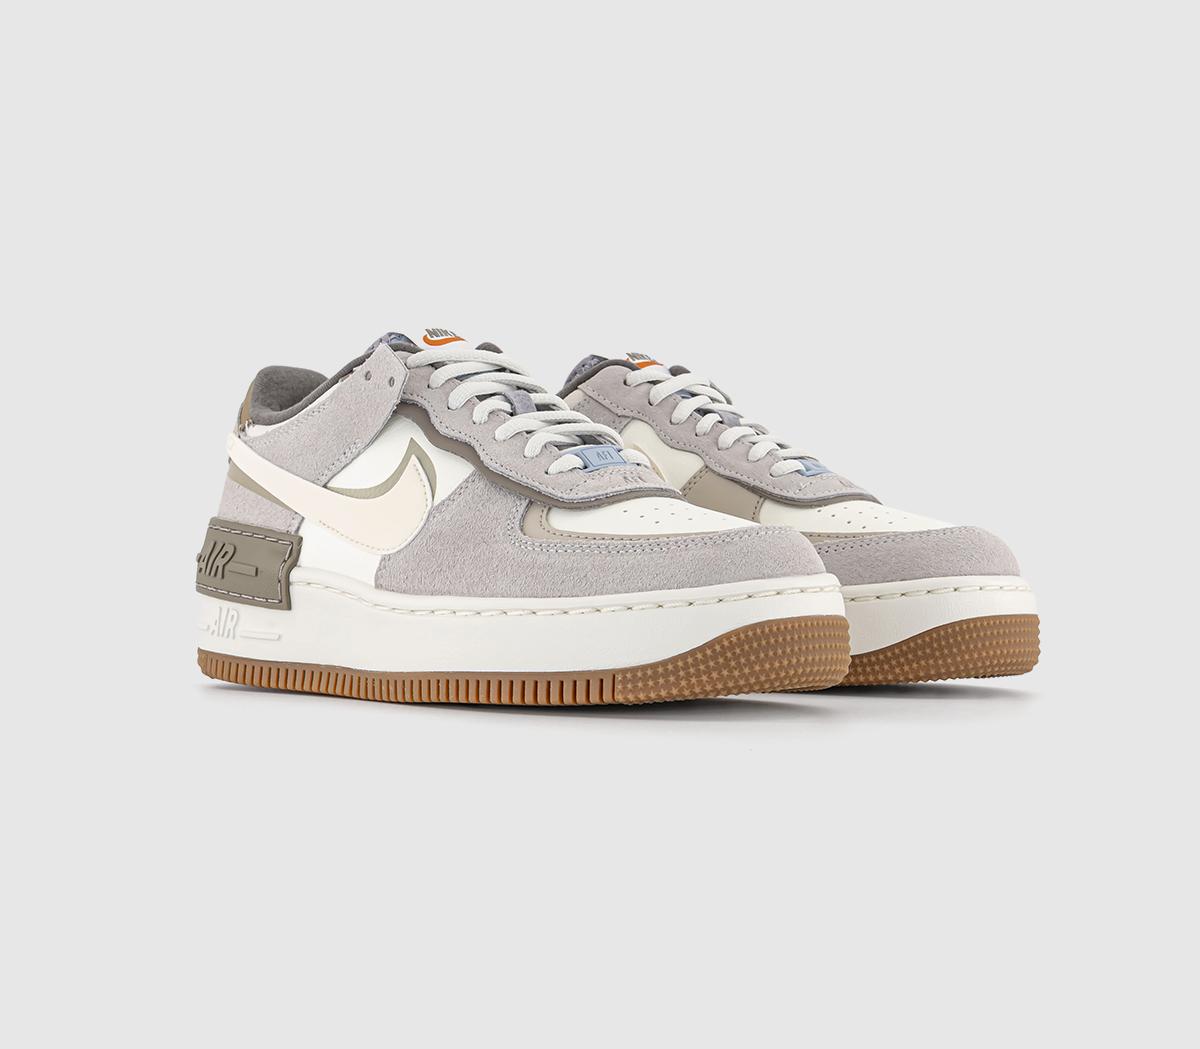 Nike Air Force 1 Shadow Trainers Sail Pale Ivory Grey Fog Provence Purple Cave White, 5